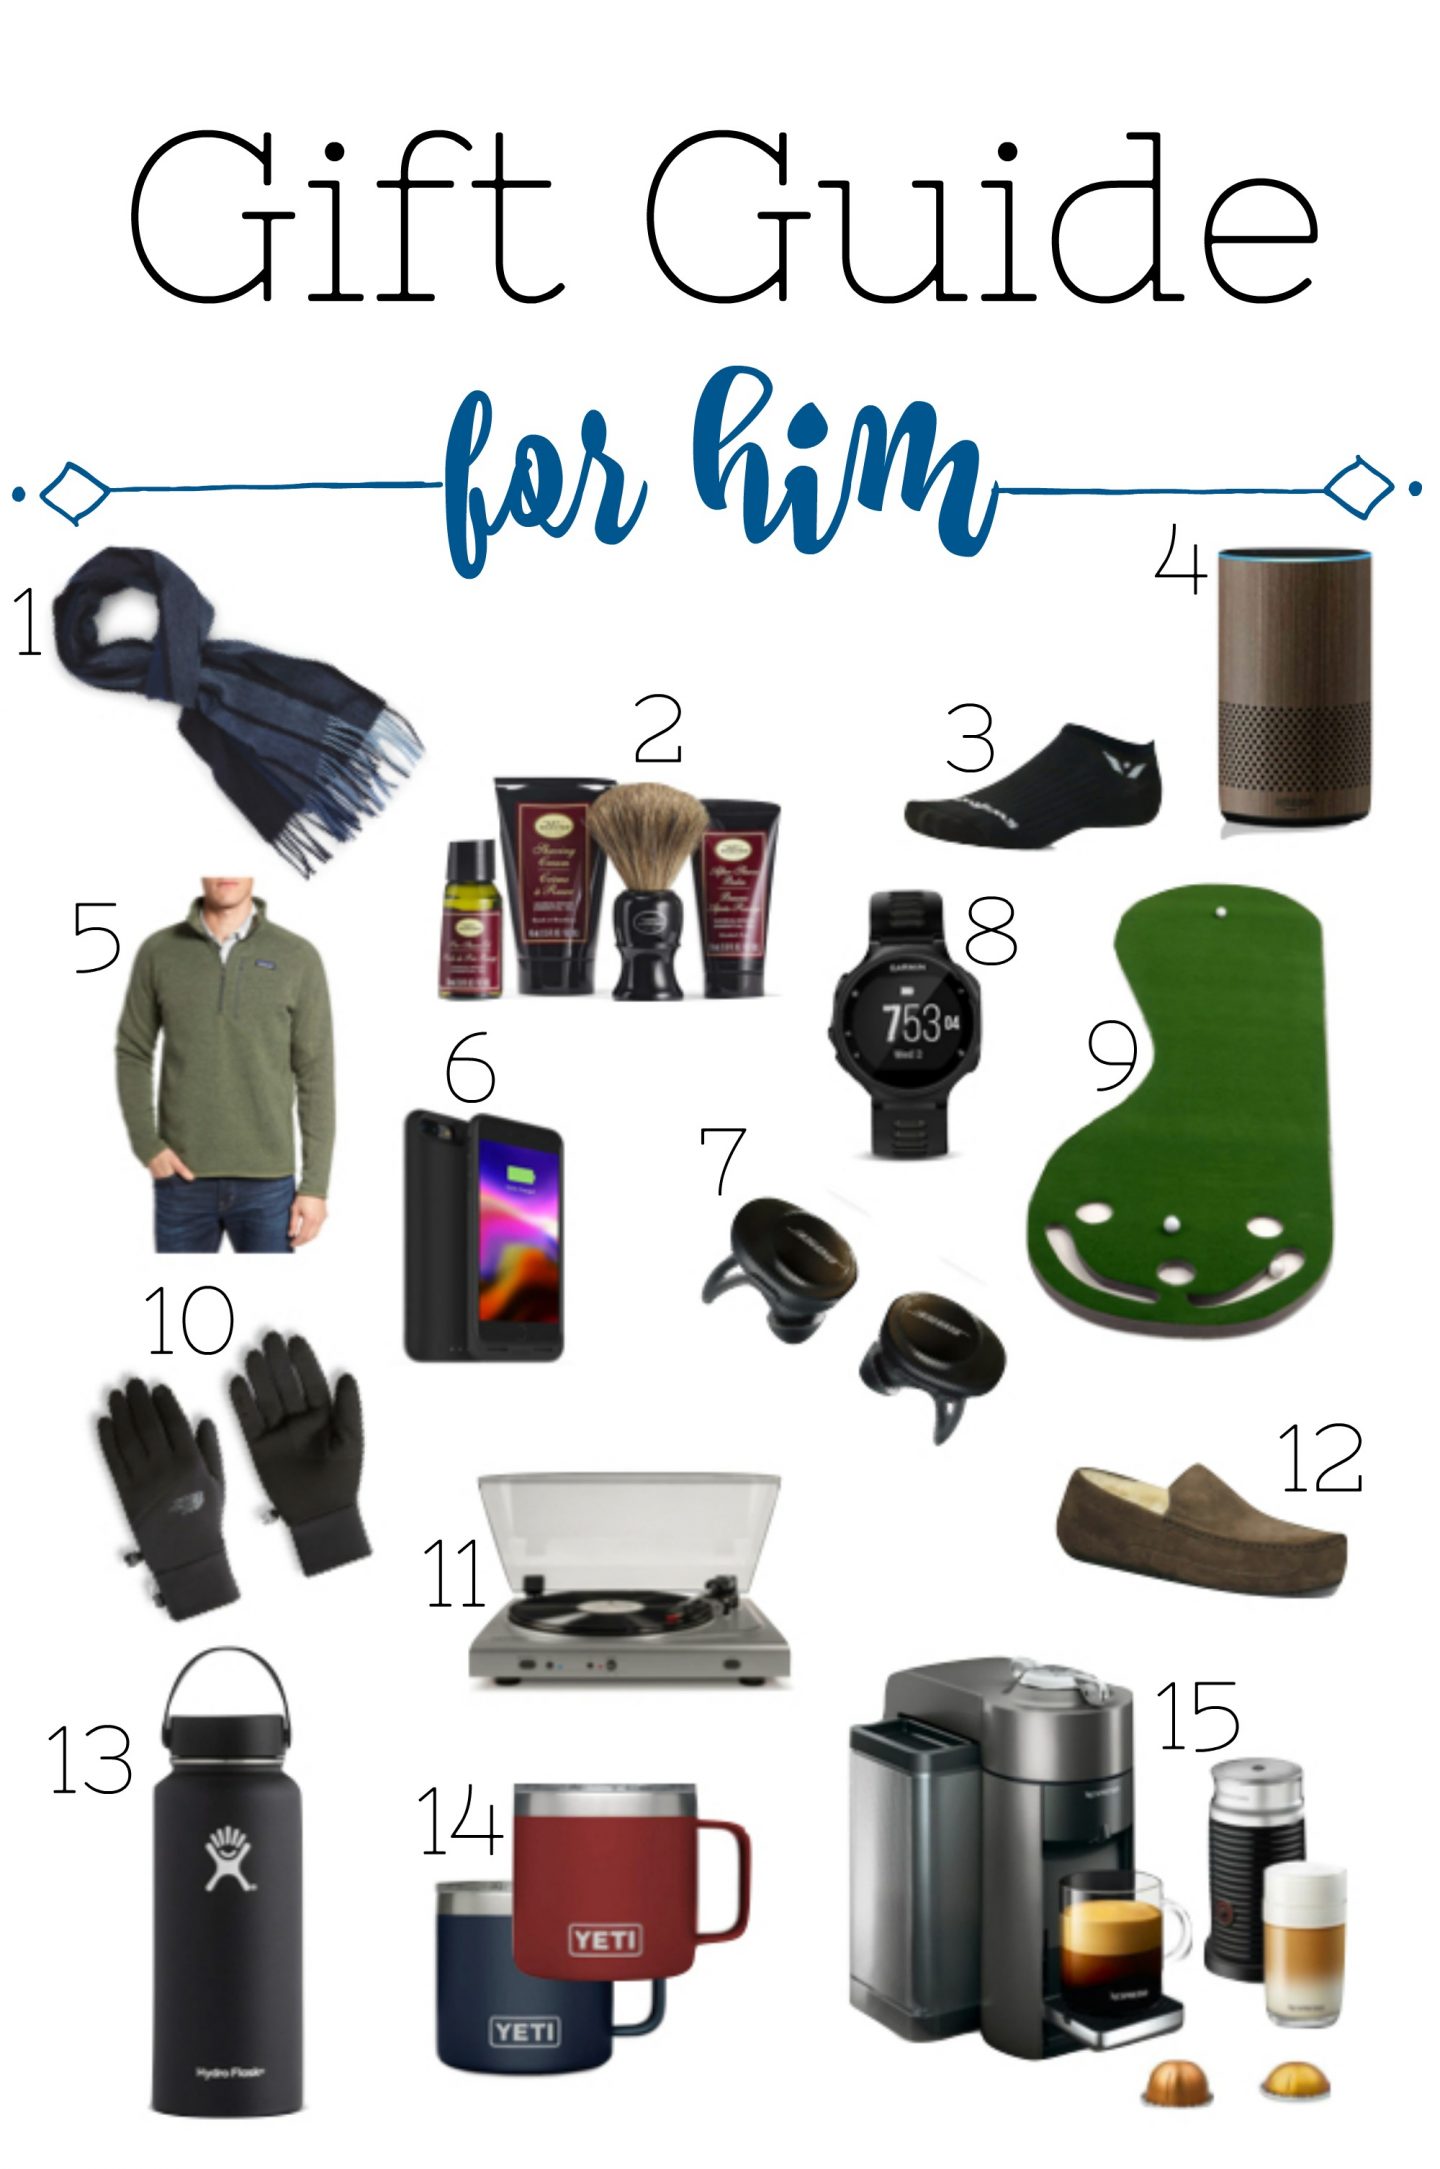 Gift Guide for Him in All Price Ranges